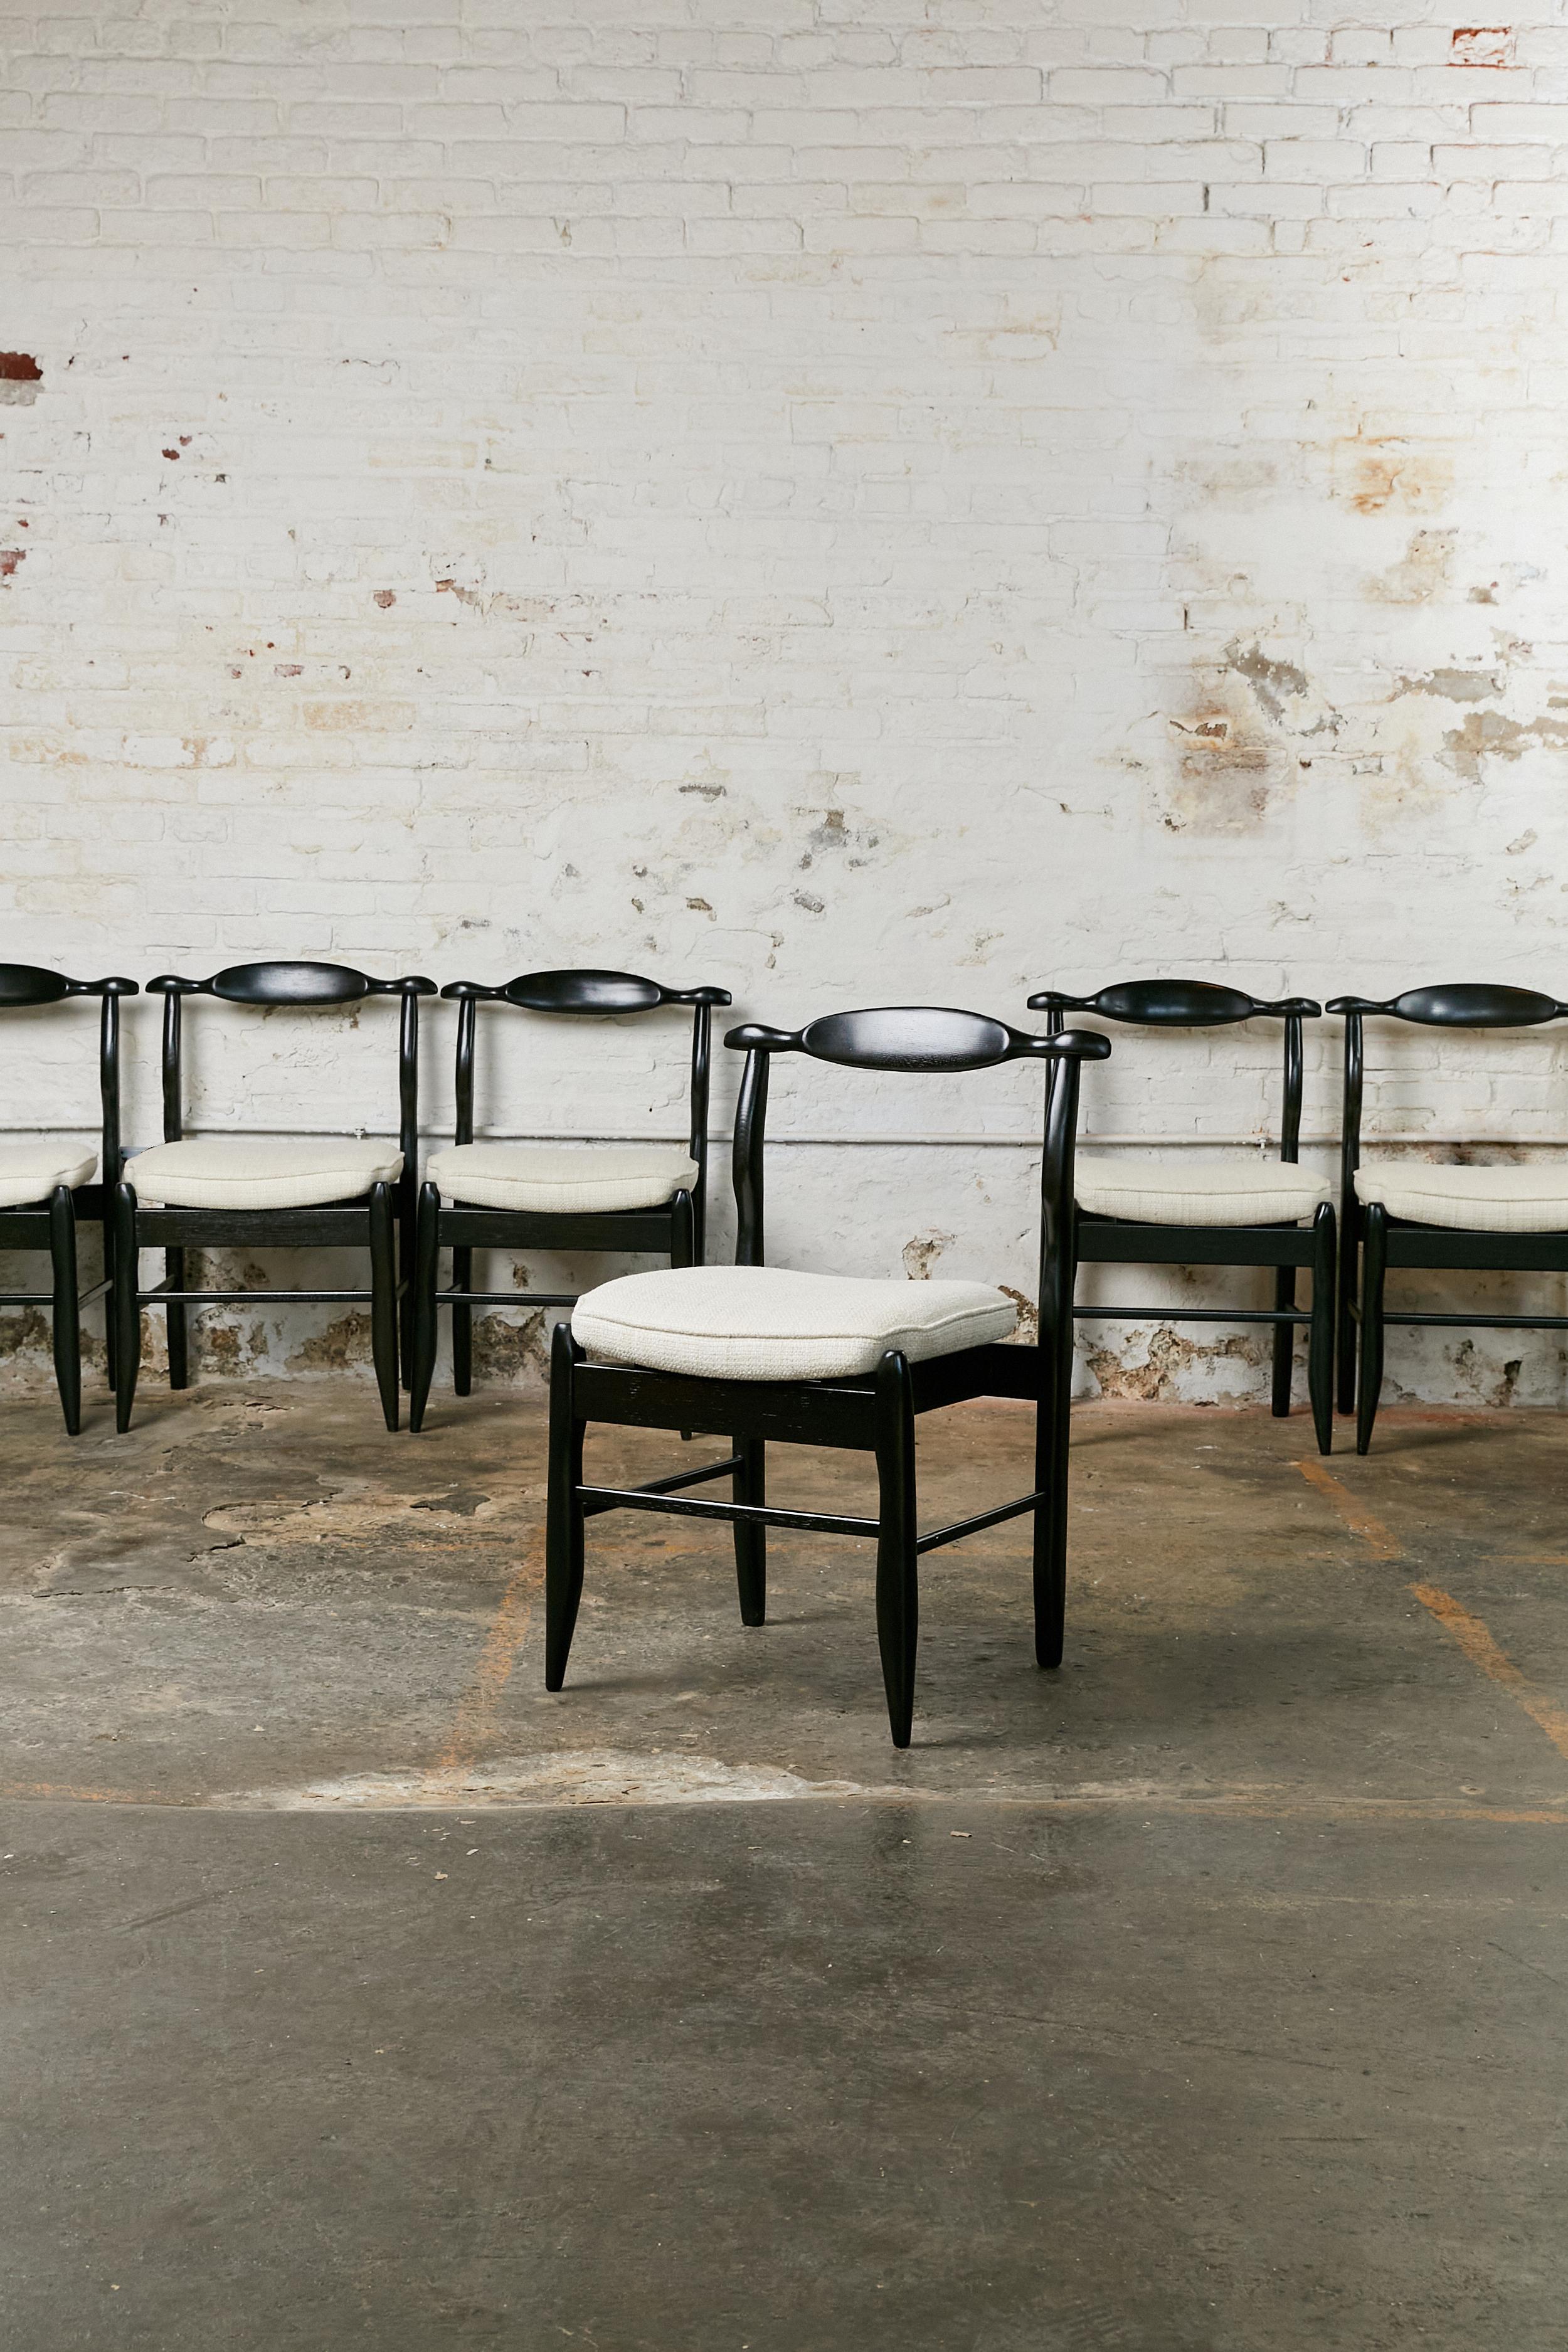 Set of six dining chairs designed by Guillerme et Chambron. Made of oak and re-stained in black. Seat re-upholstered in off white thick weave fabric.